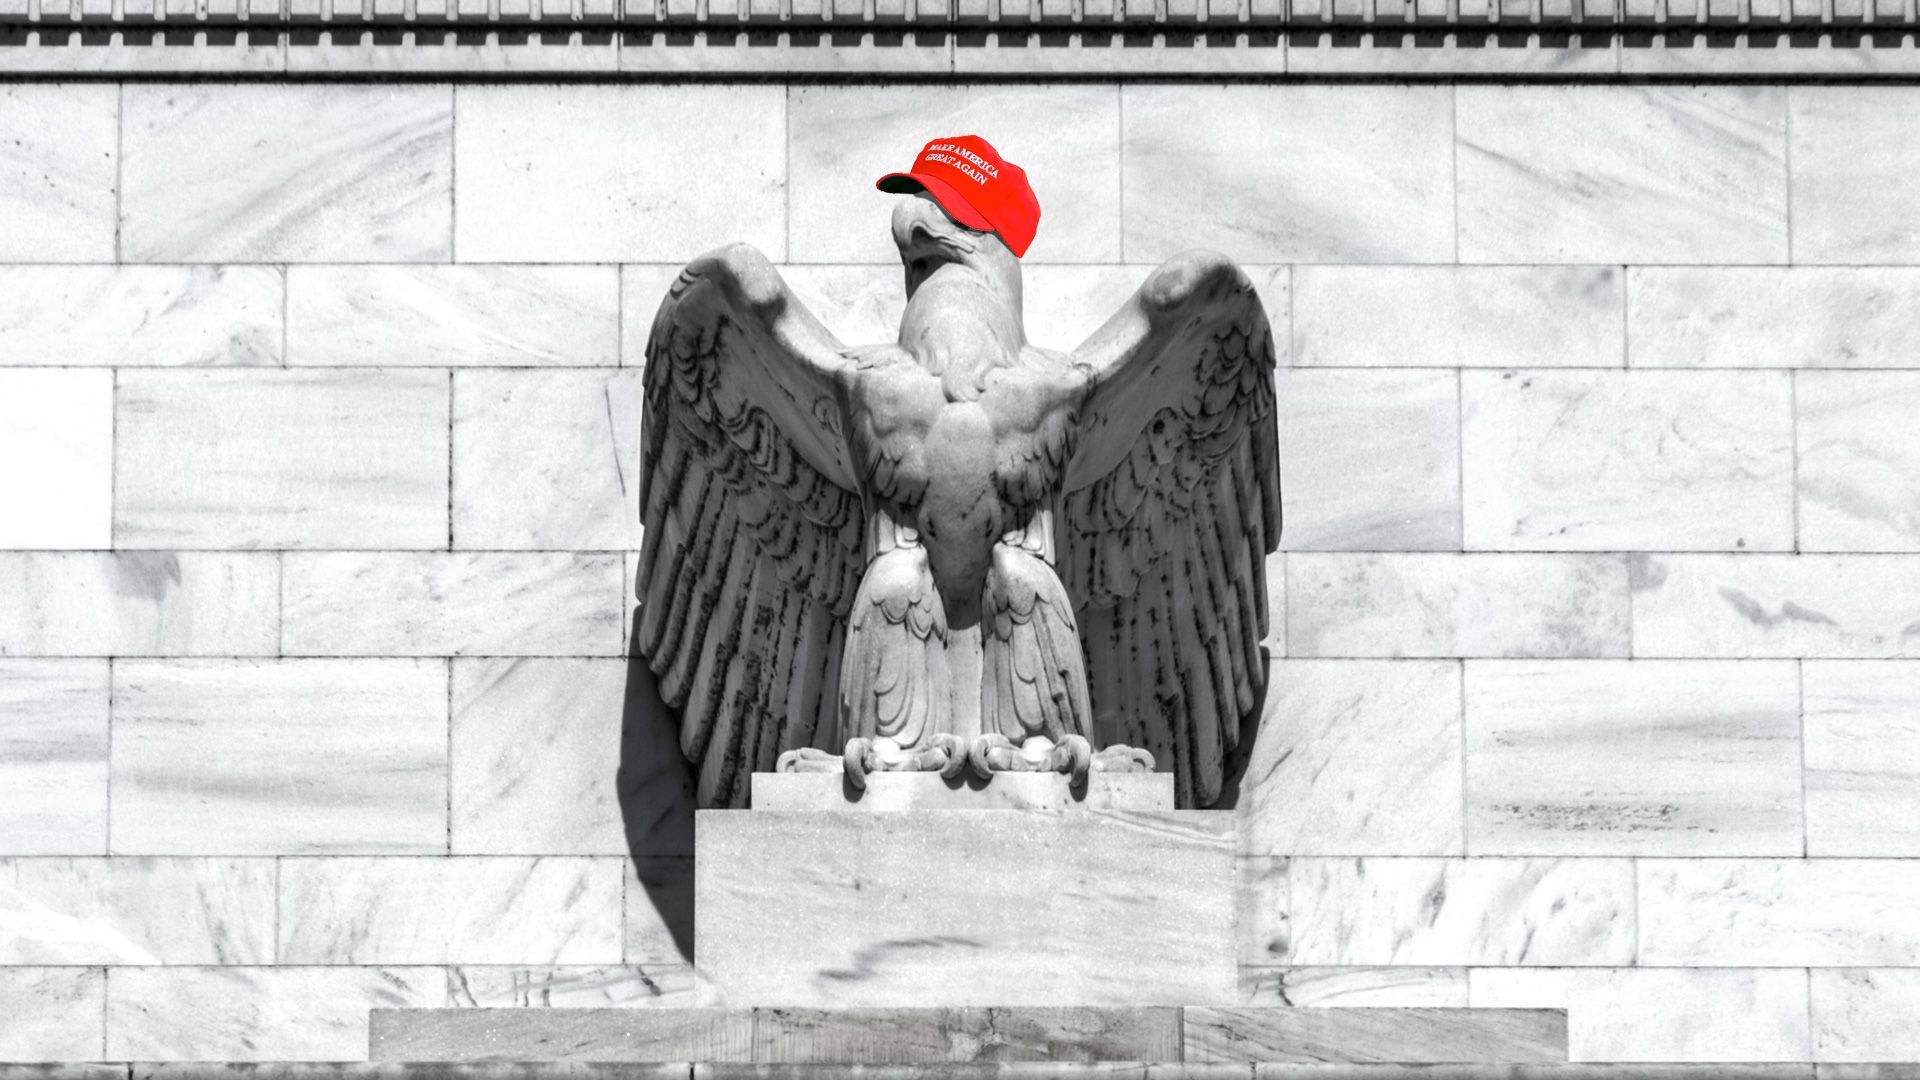 The Eagle on the facade of the Federal Reserve building wearing a MAGA hat.